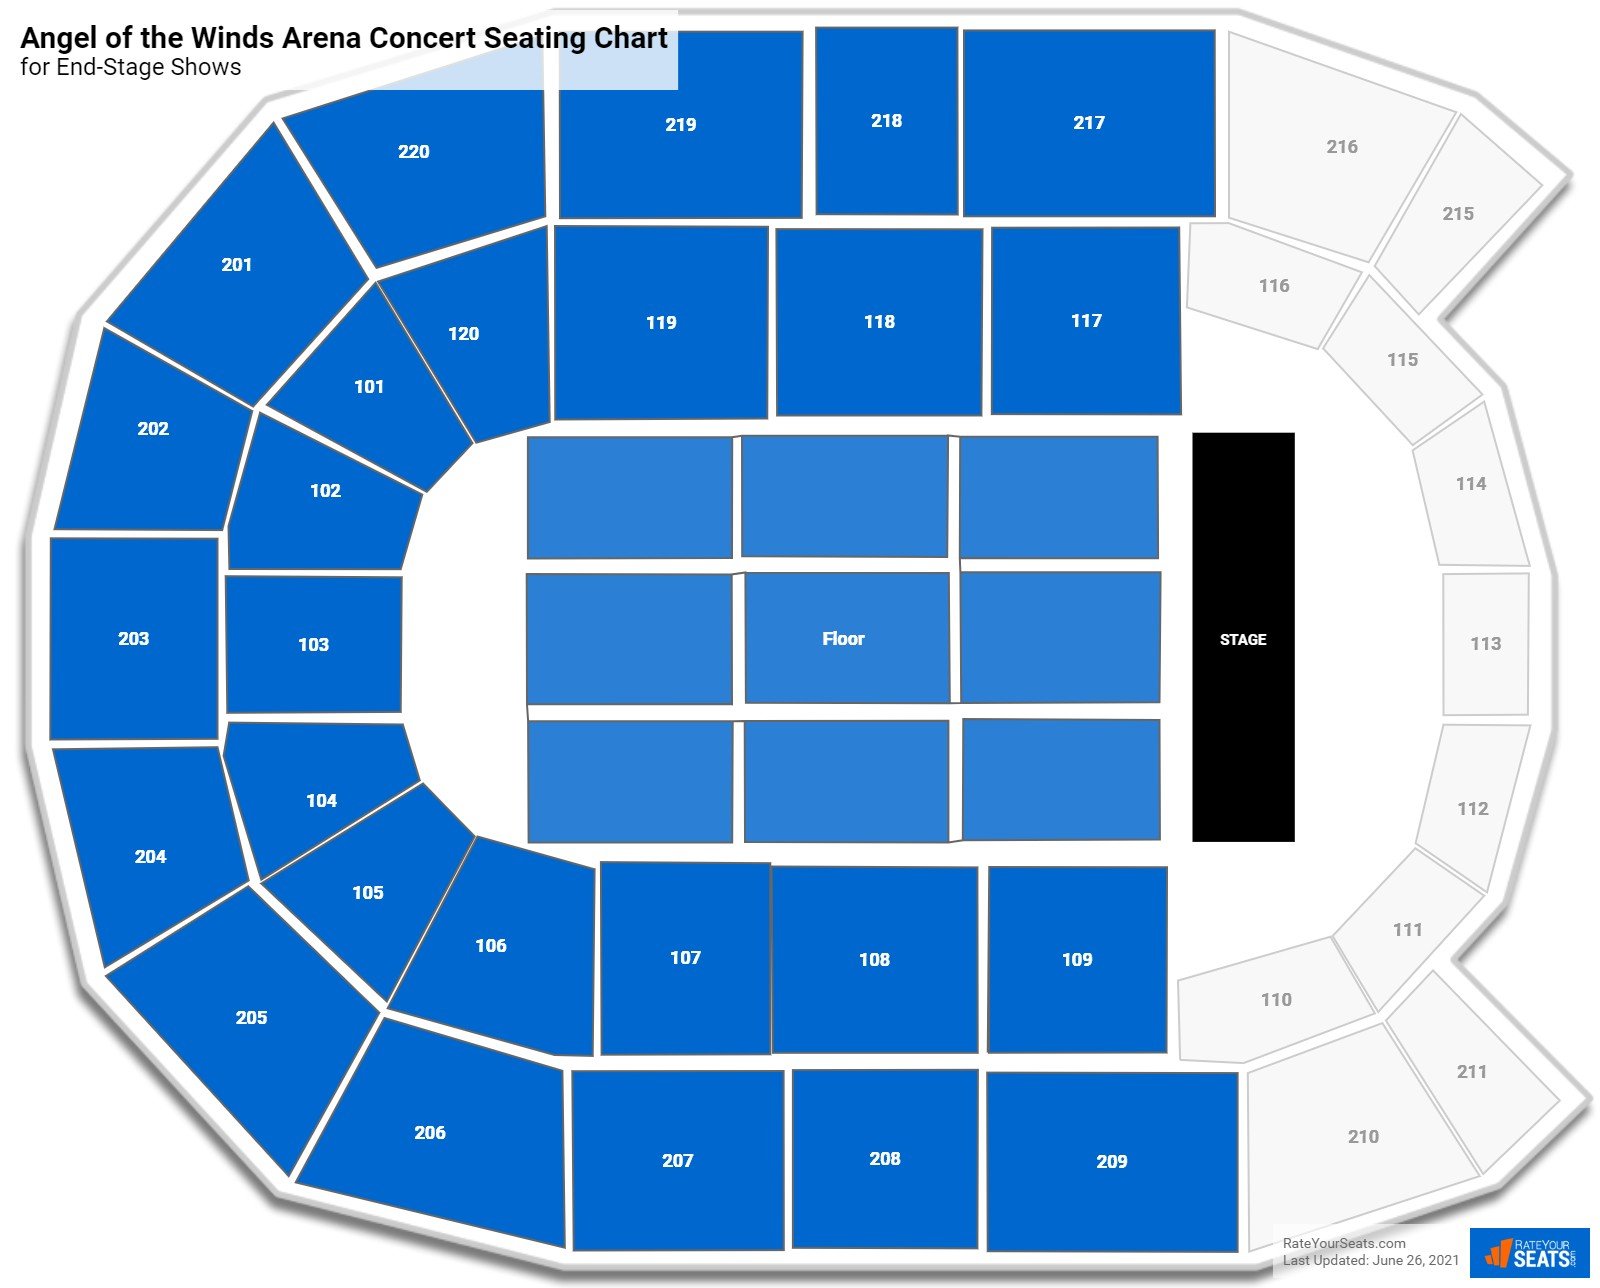 Angel of the Winds Arena Concert Seating Chart